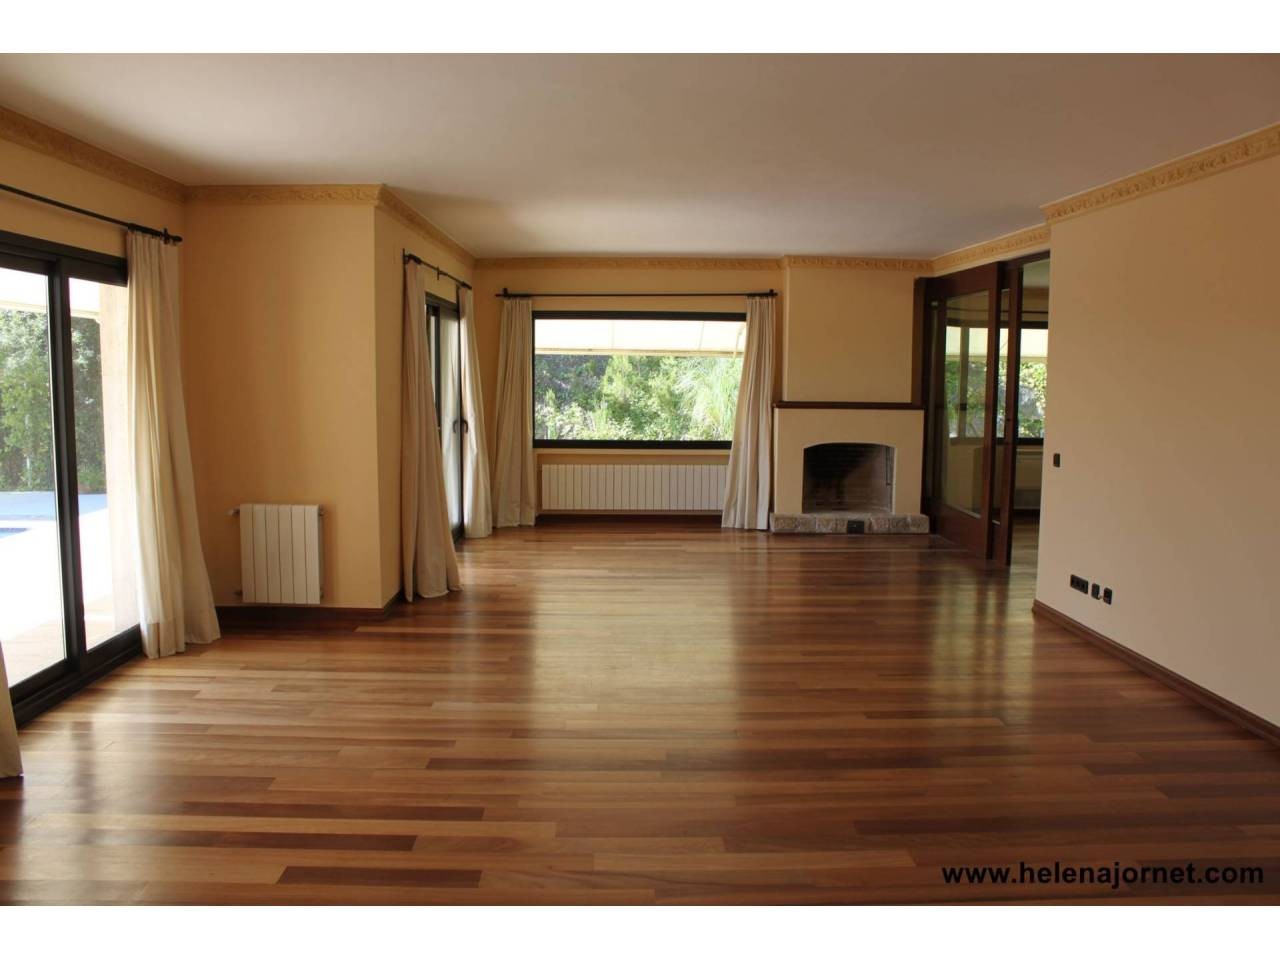 House with a floor in Costabrava Golf area. - 151